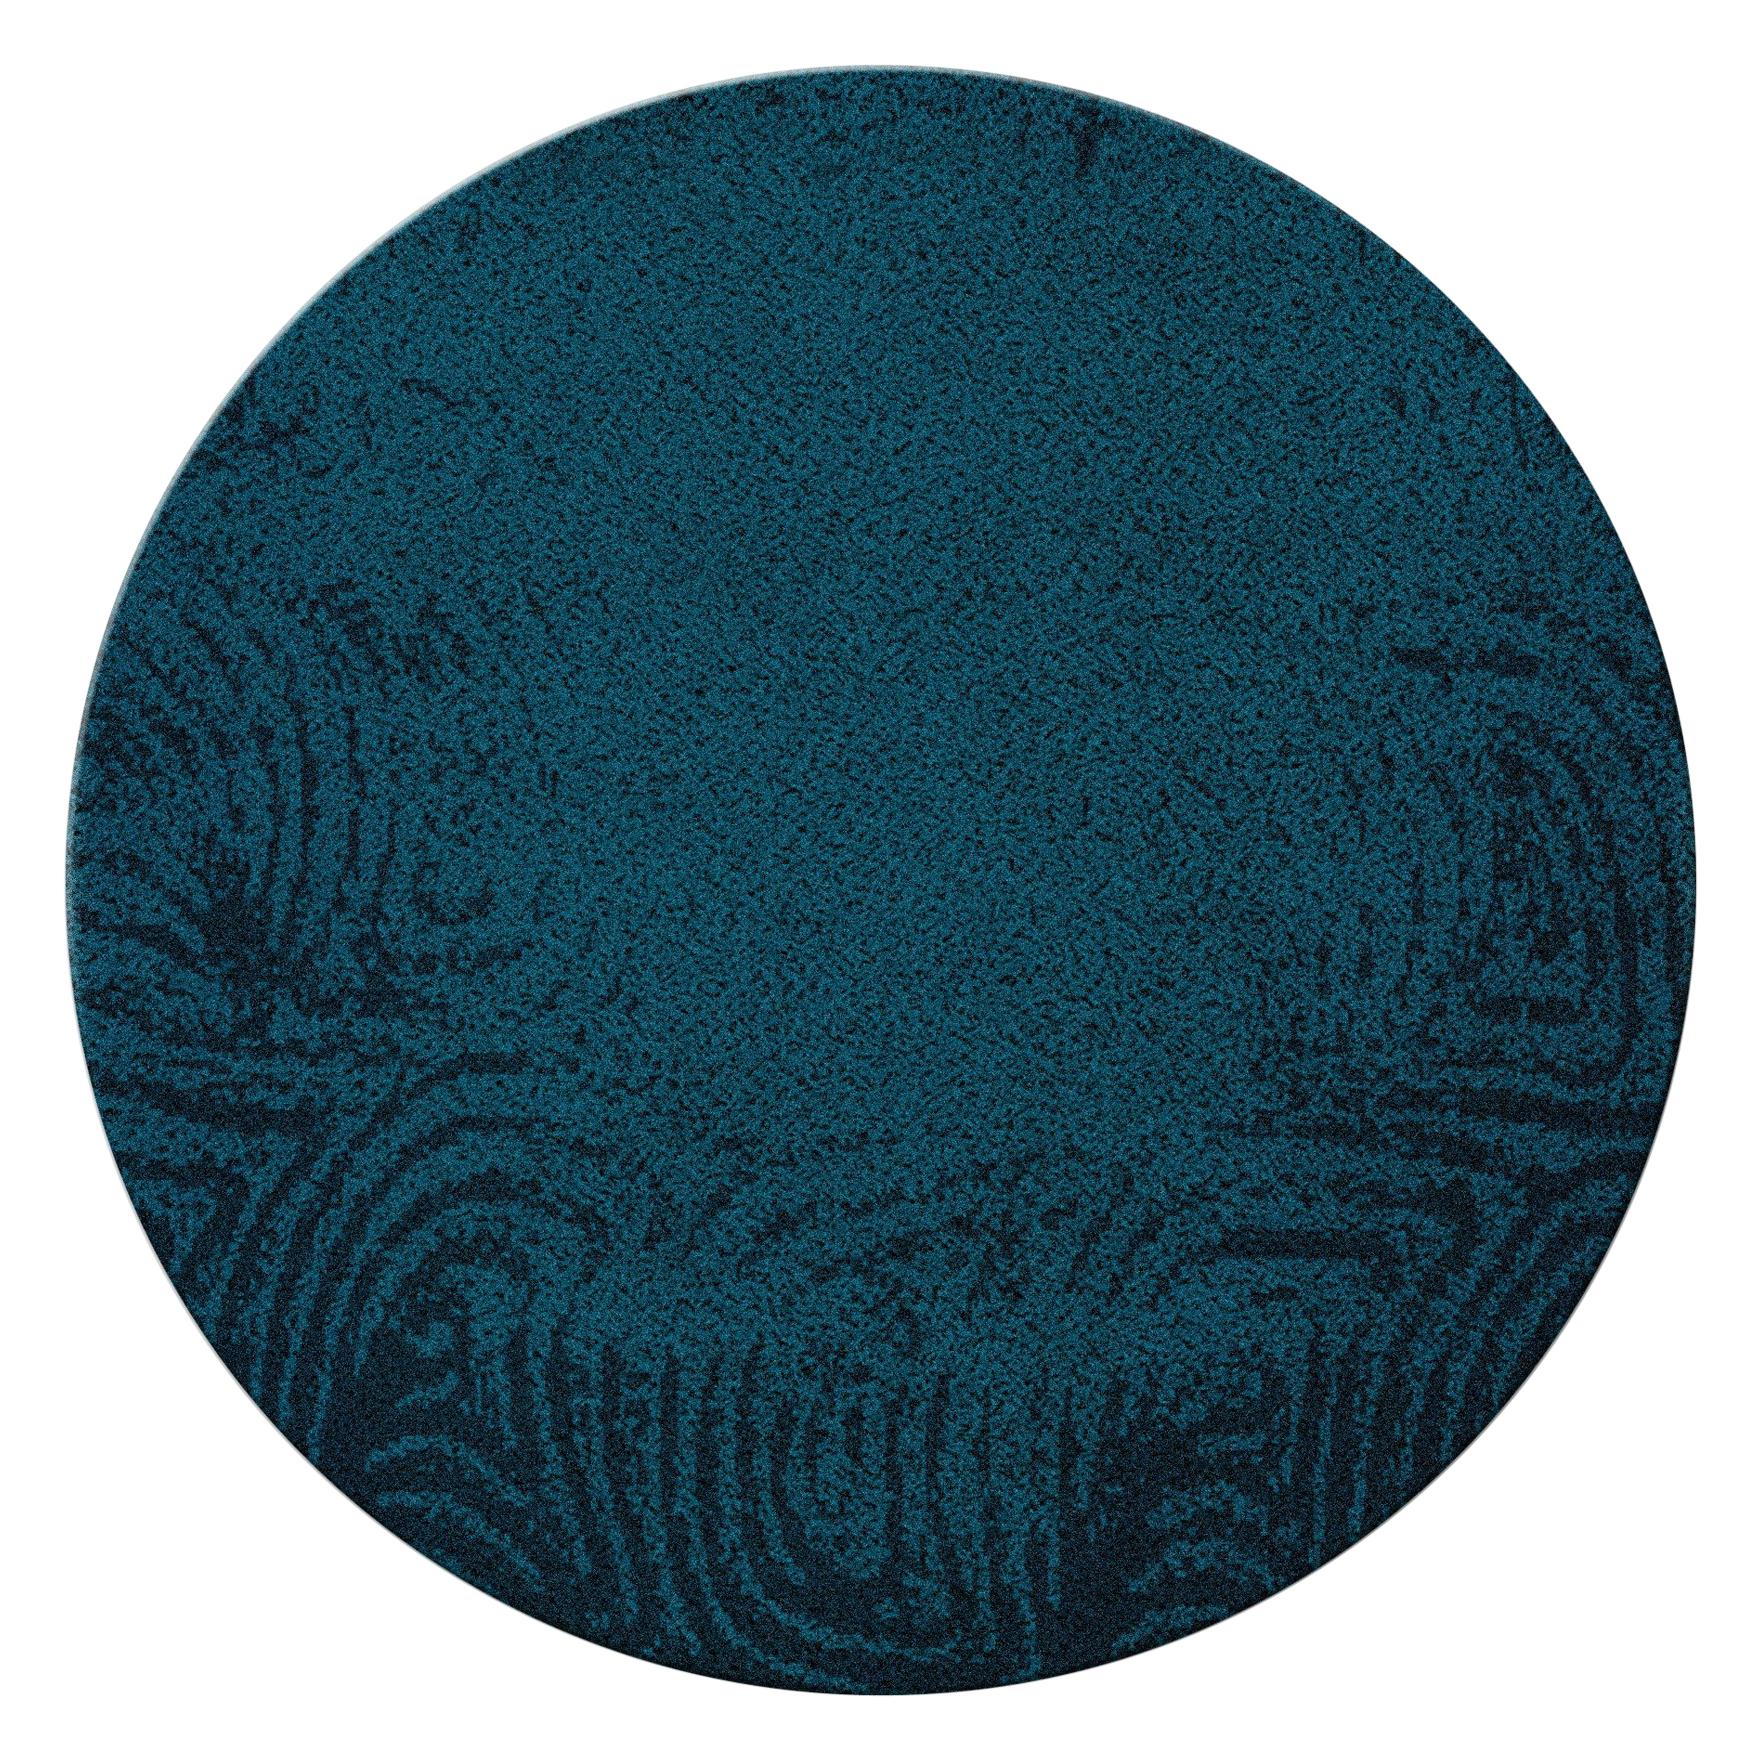  Circular Hand-Knotted Dyed Wool Surma Rug ii in Midnight Blue by BRABBU For Sale